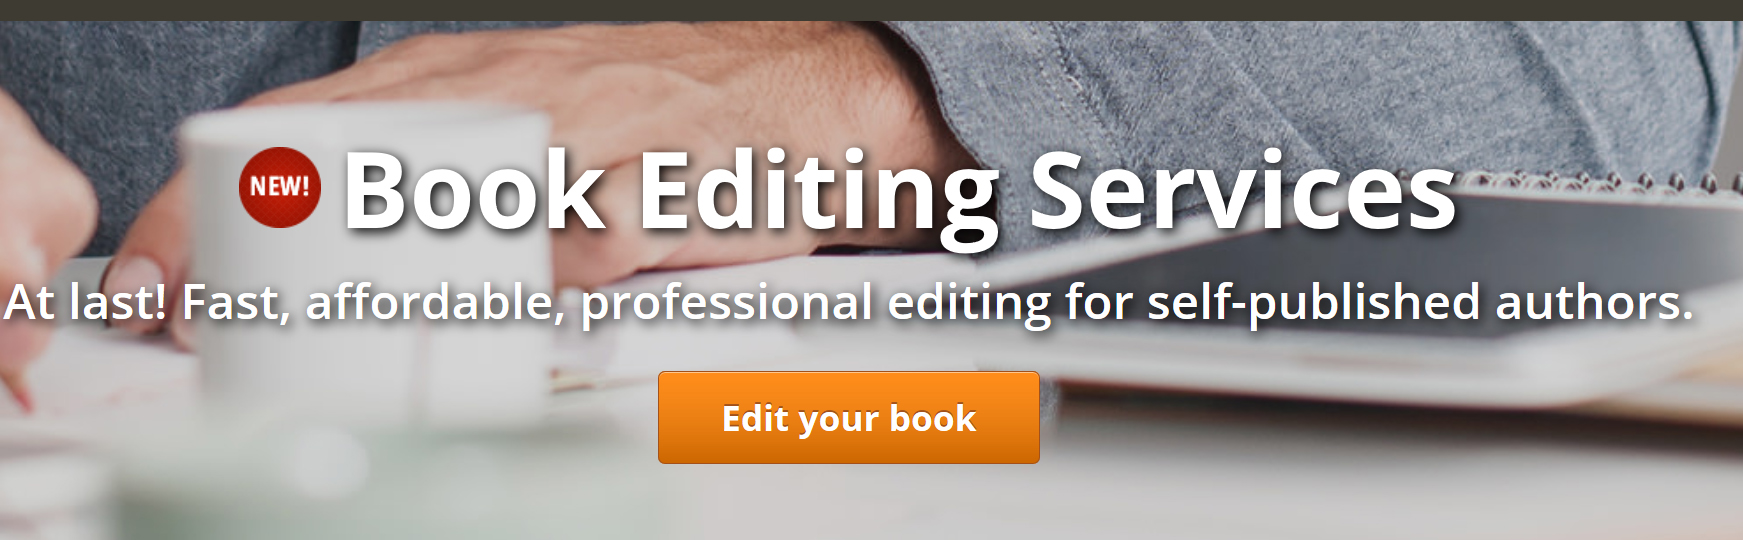 Looking for book editor, Professional Book editing service